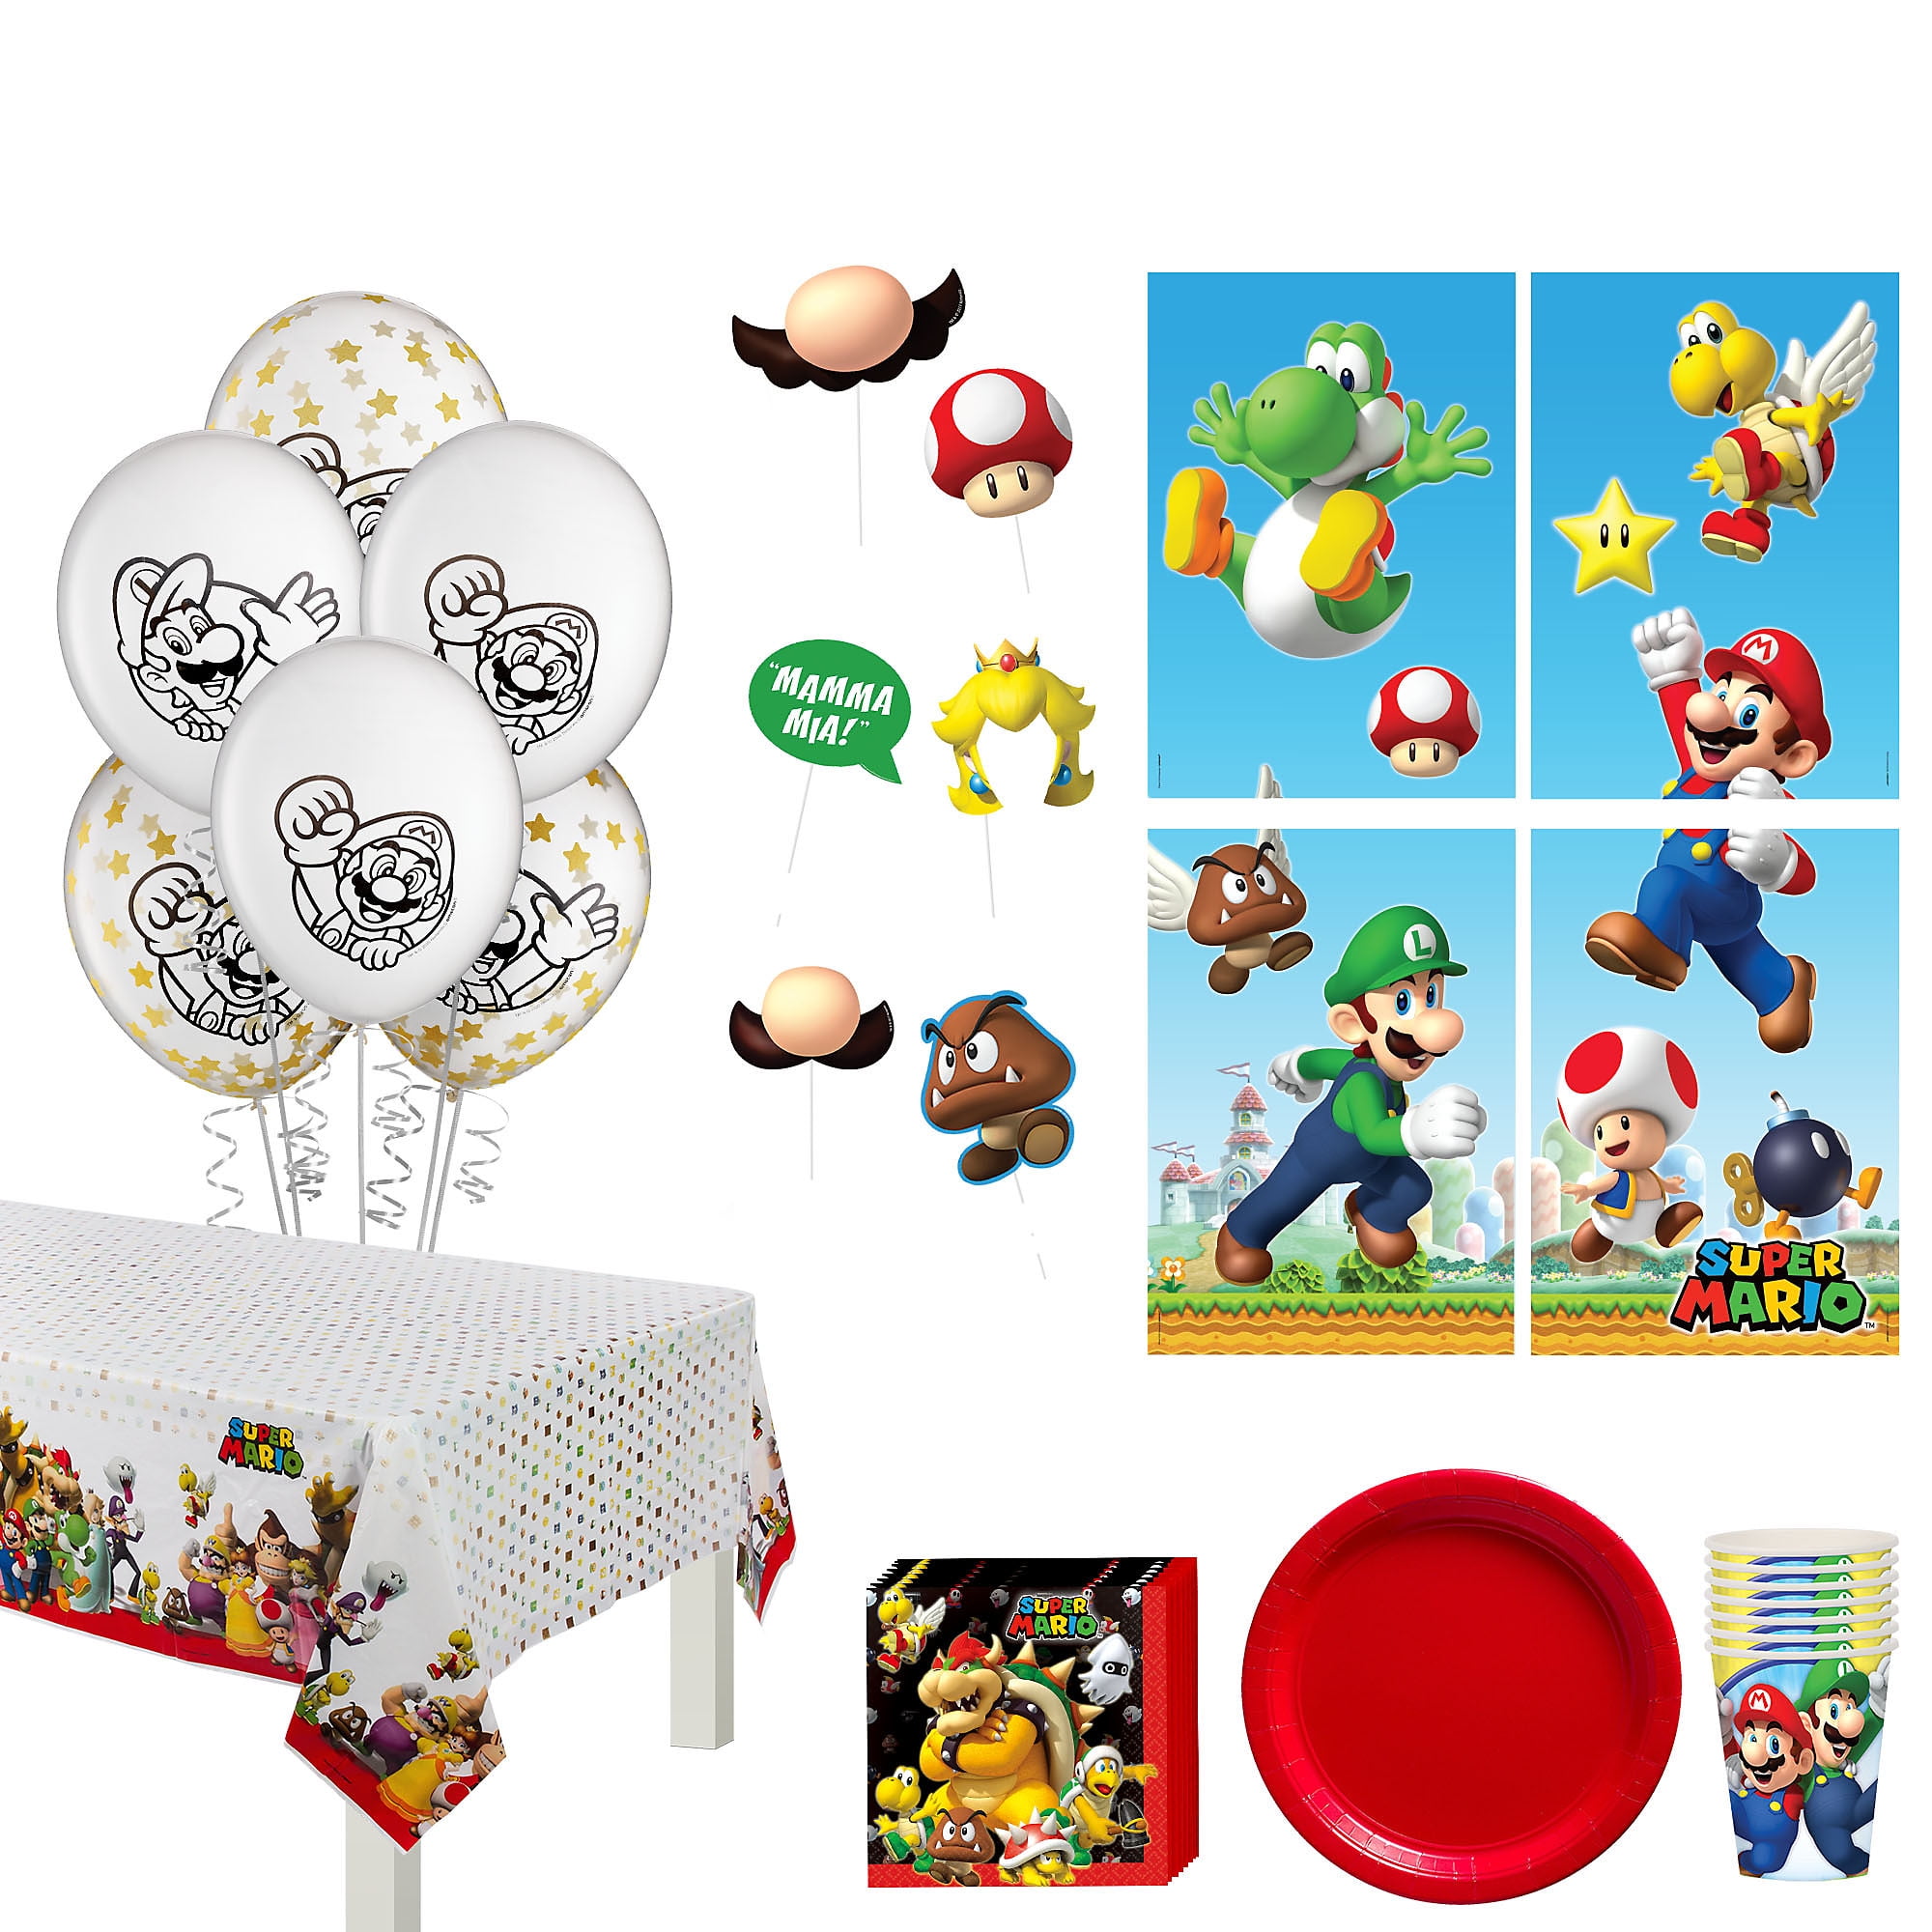 Toy Game Story Birthady Party Supplies for Kids/Baby Shower 130pc